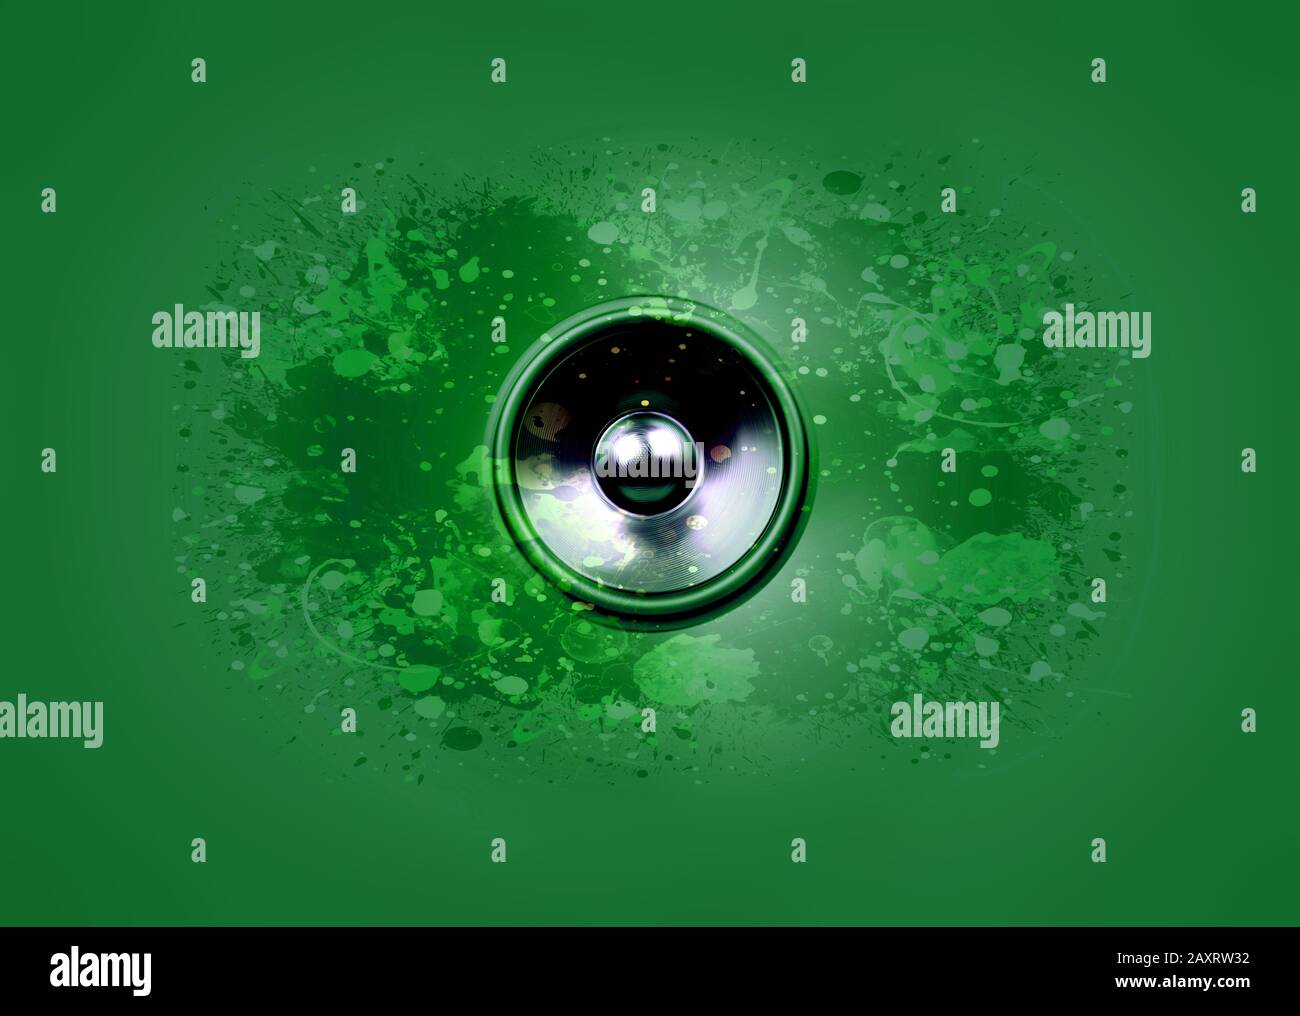 Spinning audio speaker on a green background with paint splatters Stock Photo